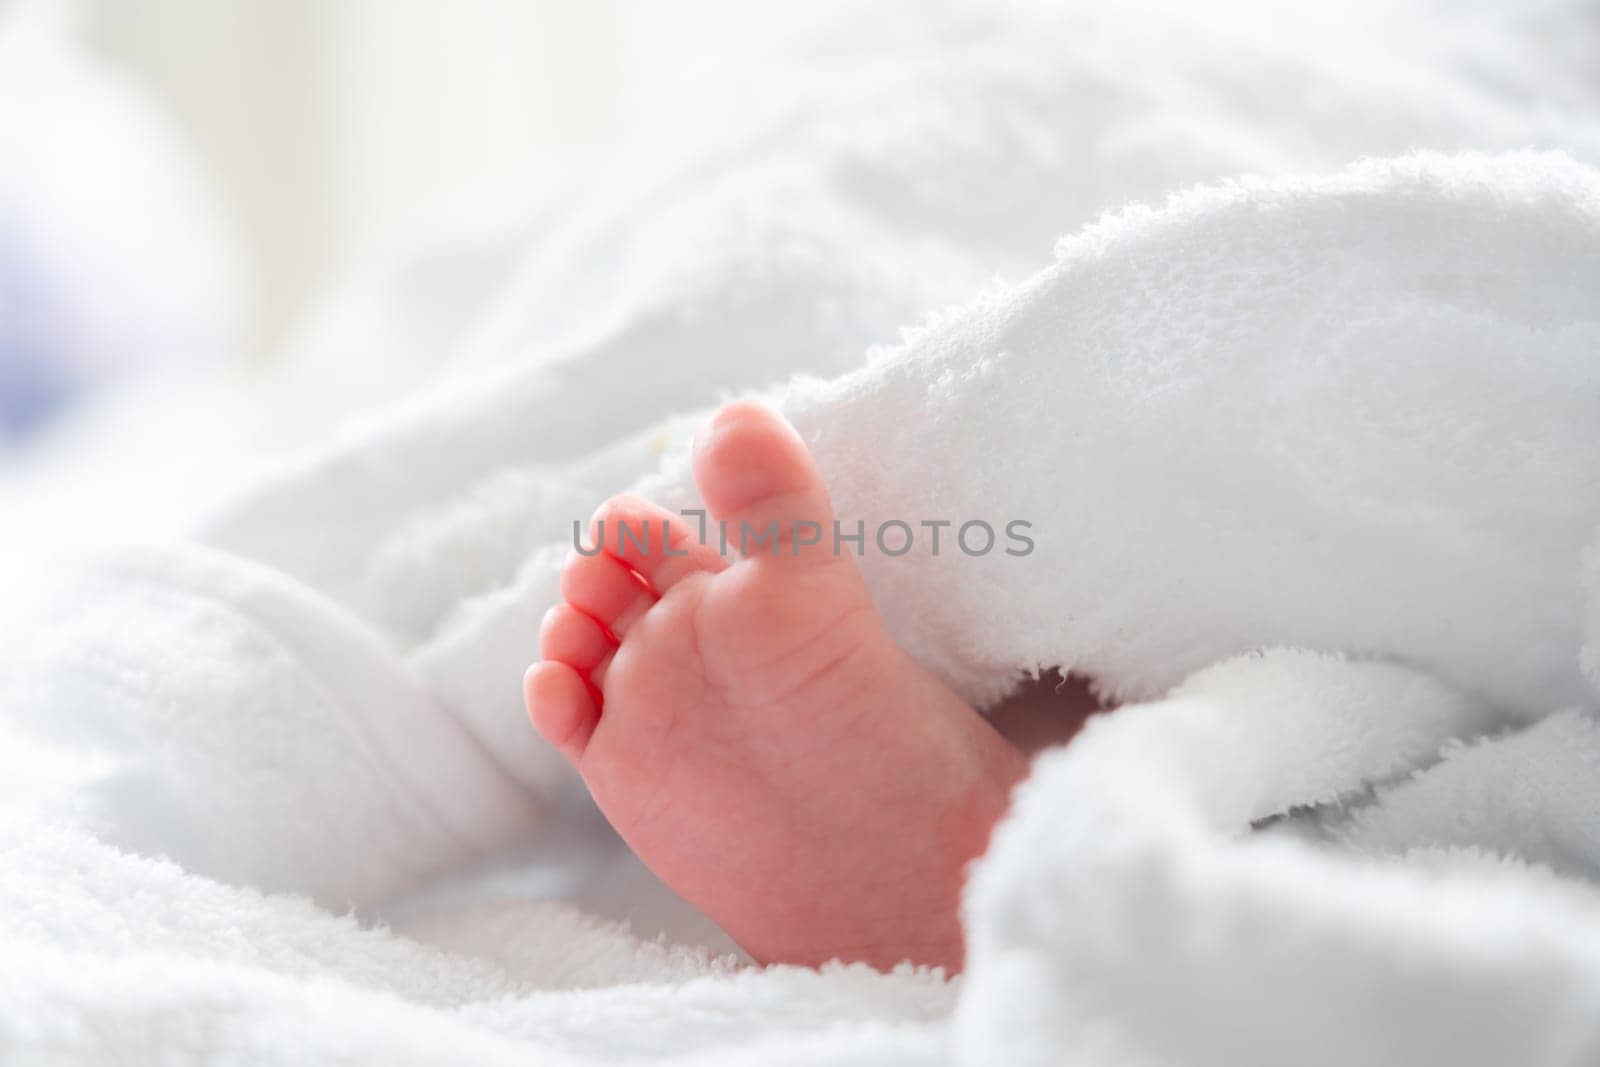 After the bath: infant's foot shyly emerging from soft white comfort by Mariakray